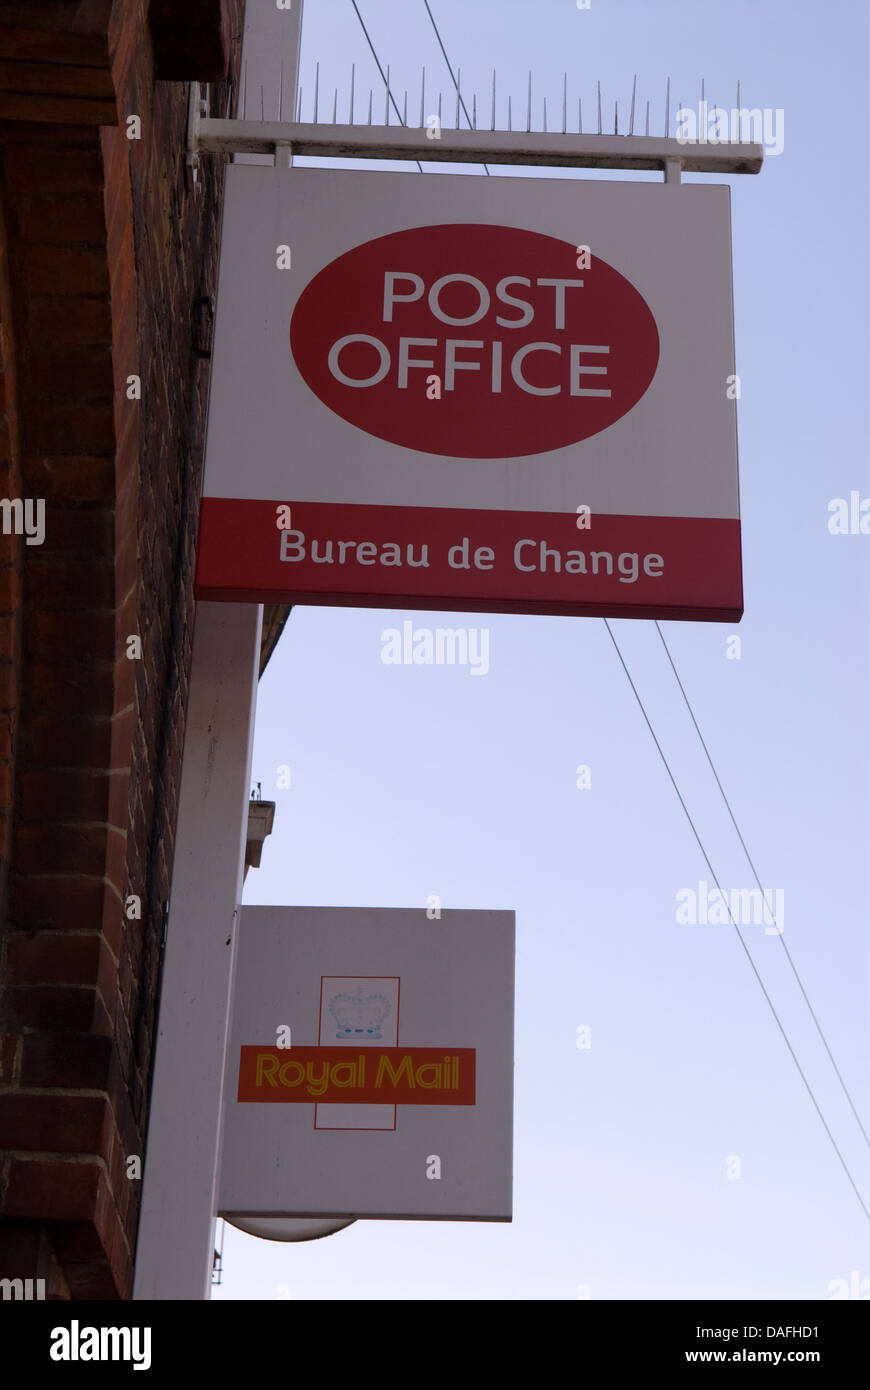 Sign for Royal Mail office and Bureau de Change services, main post office, Petersfield, Hampshire, UK. Stock Photo